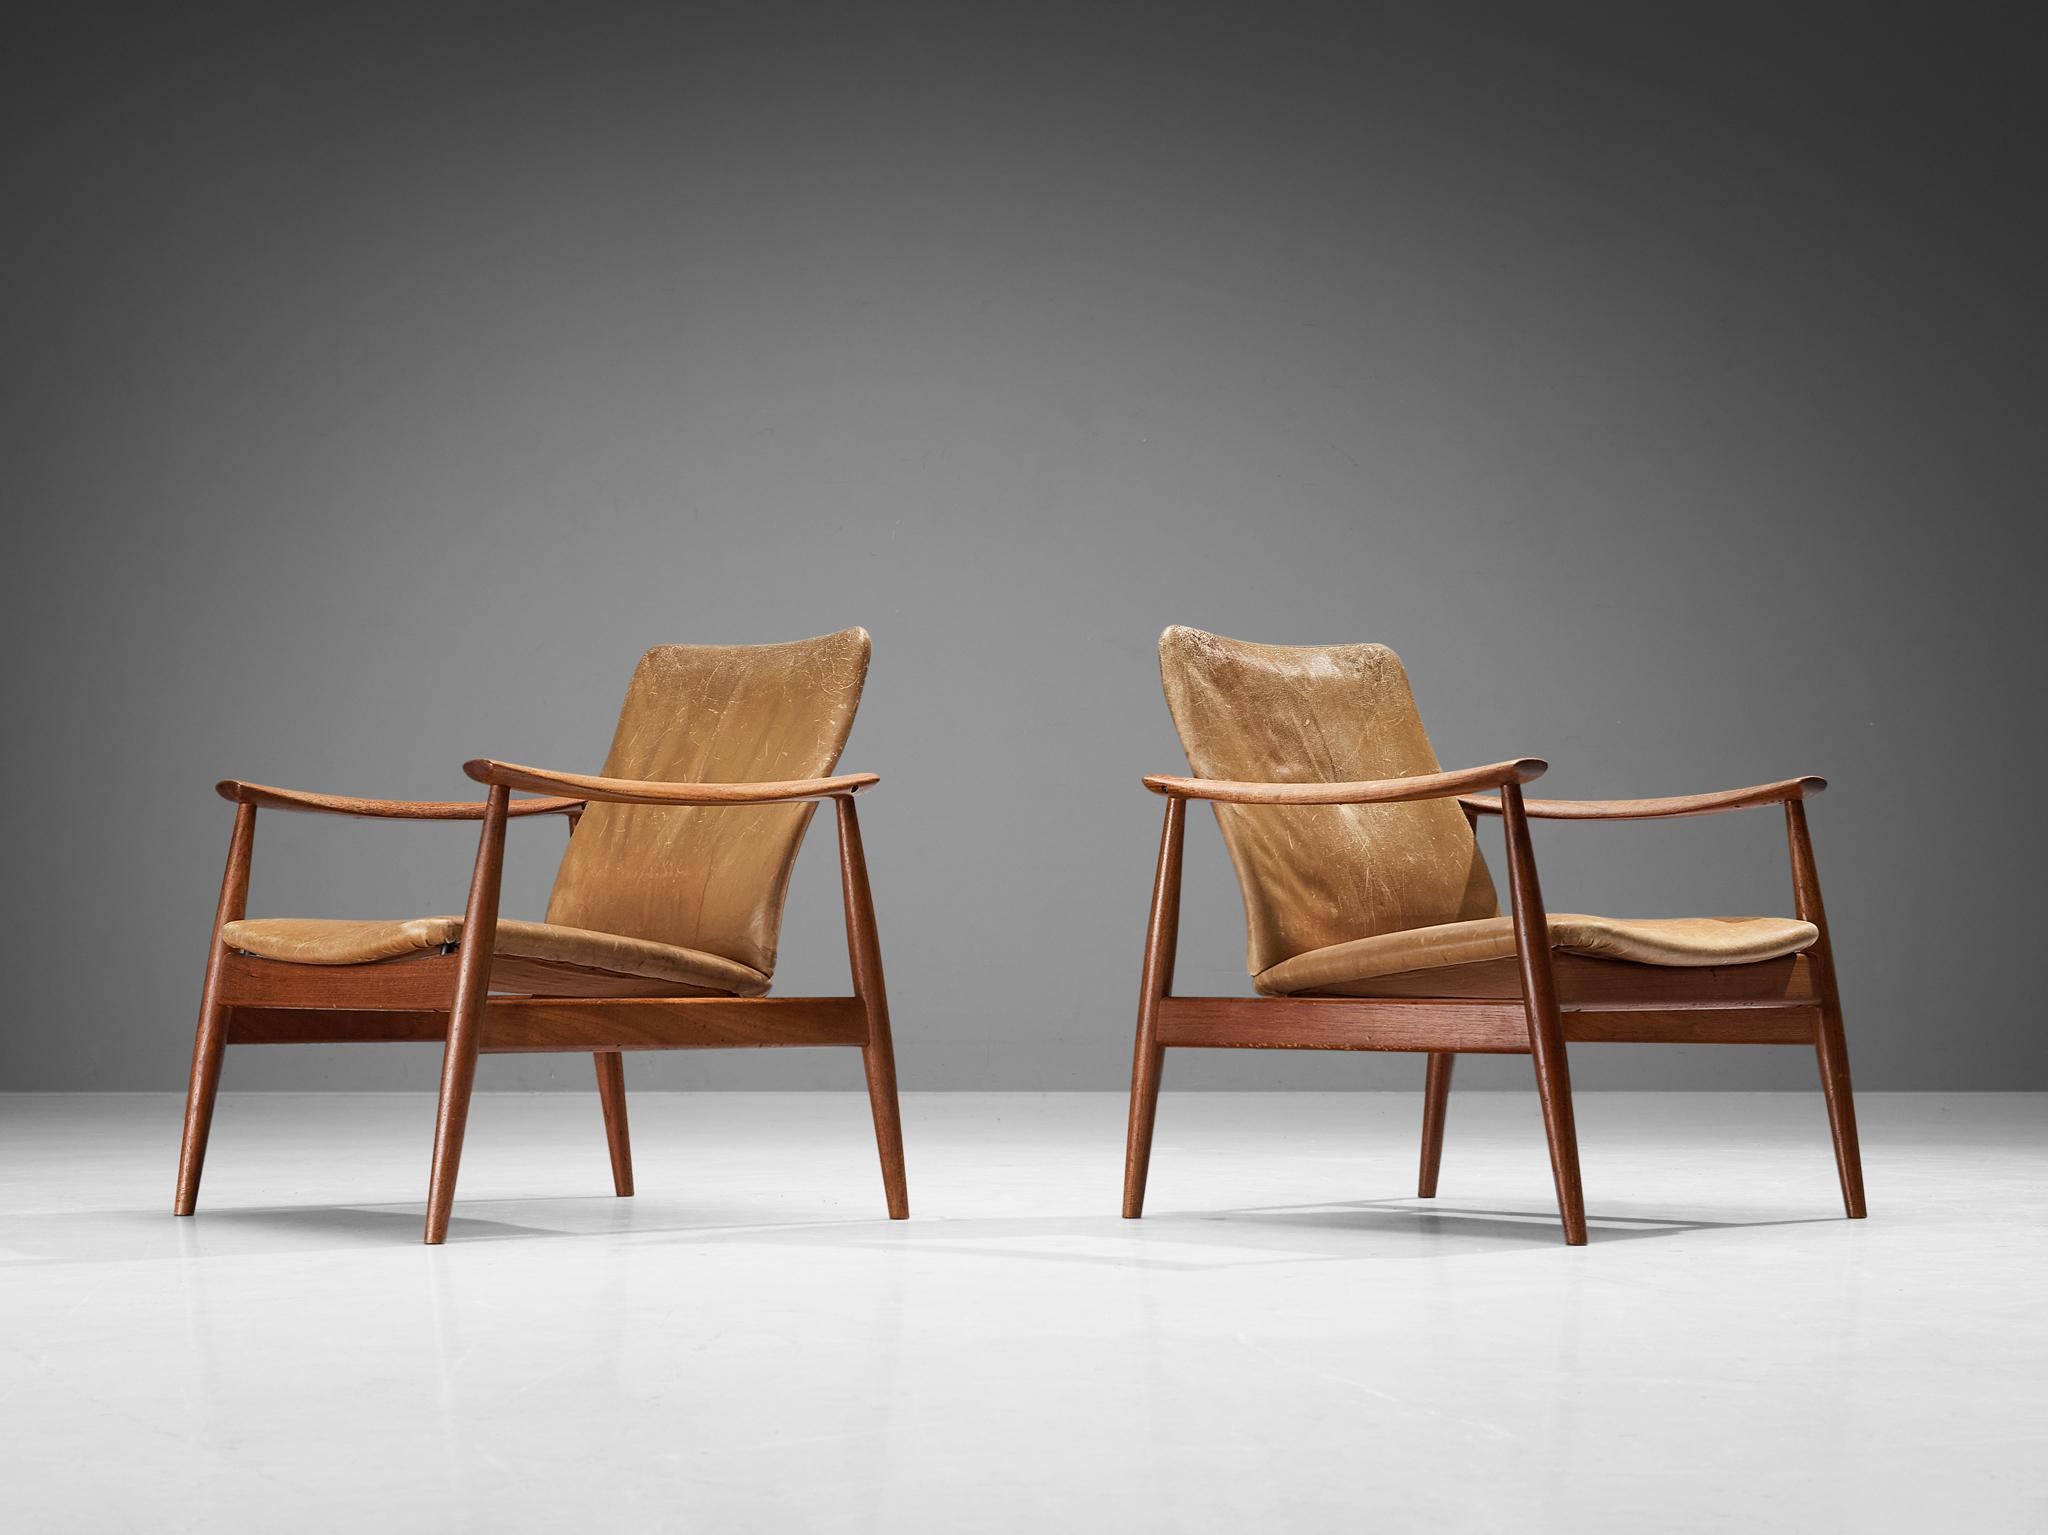 Mid-20th Century Finn Juhl for France & Søn Pair of Lounge Chairs in Teak and Leather  For Sale